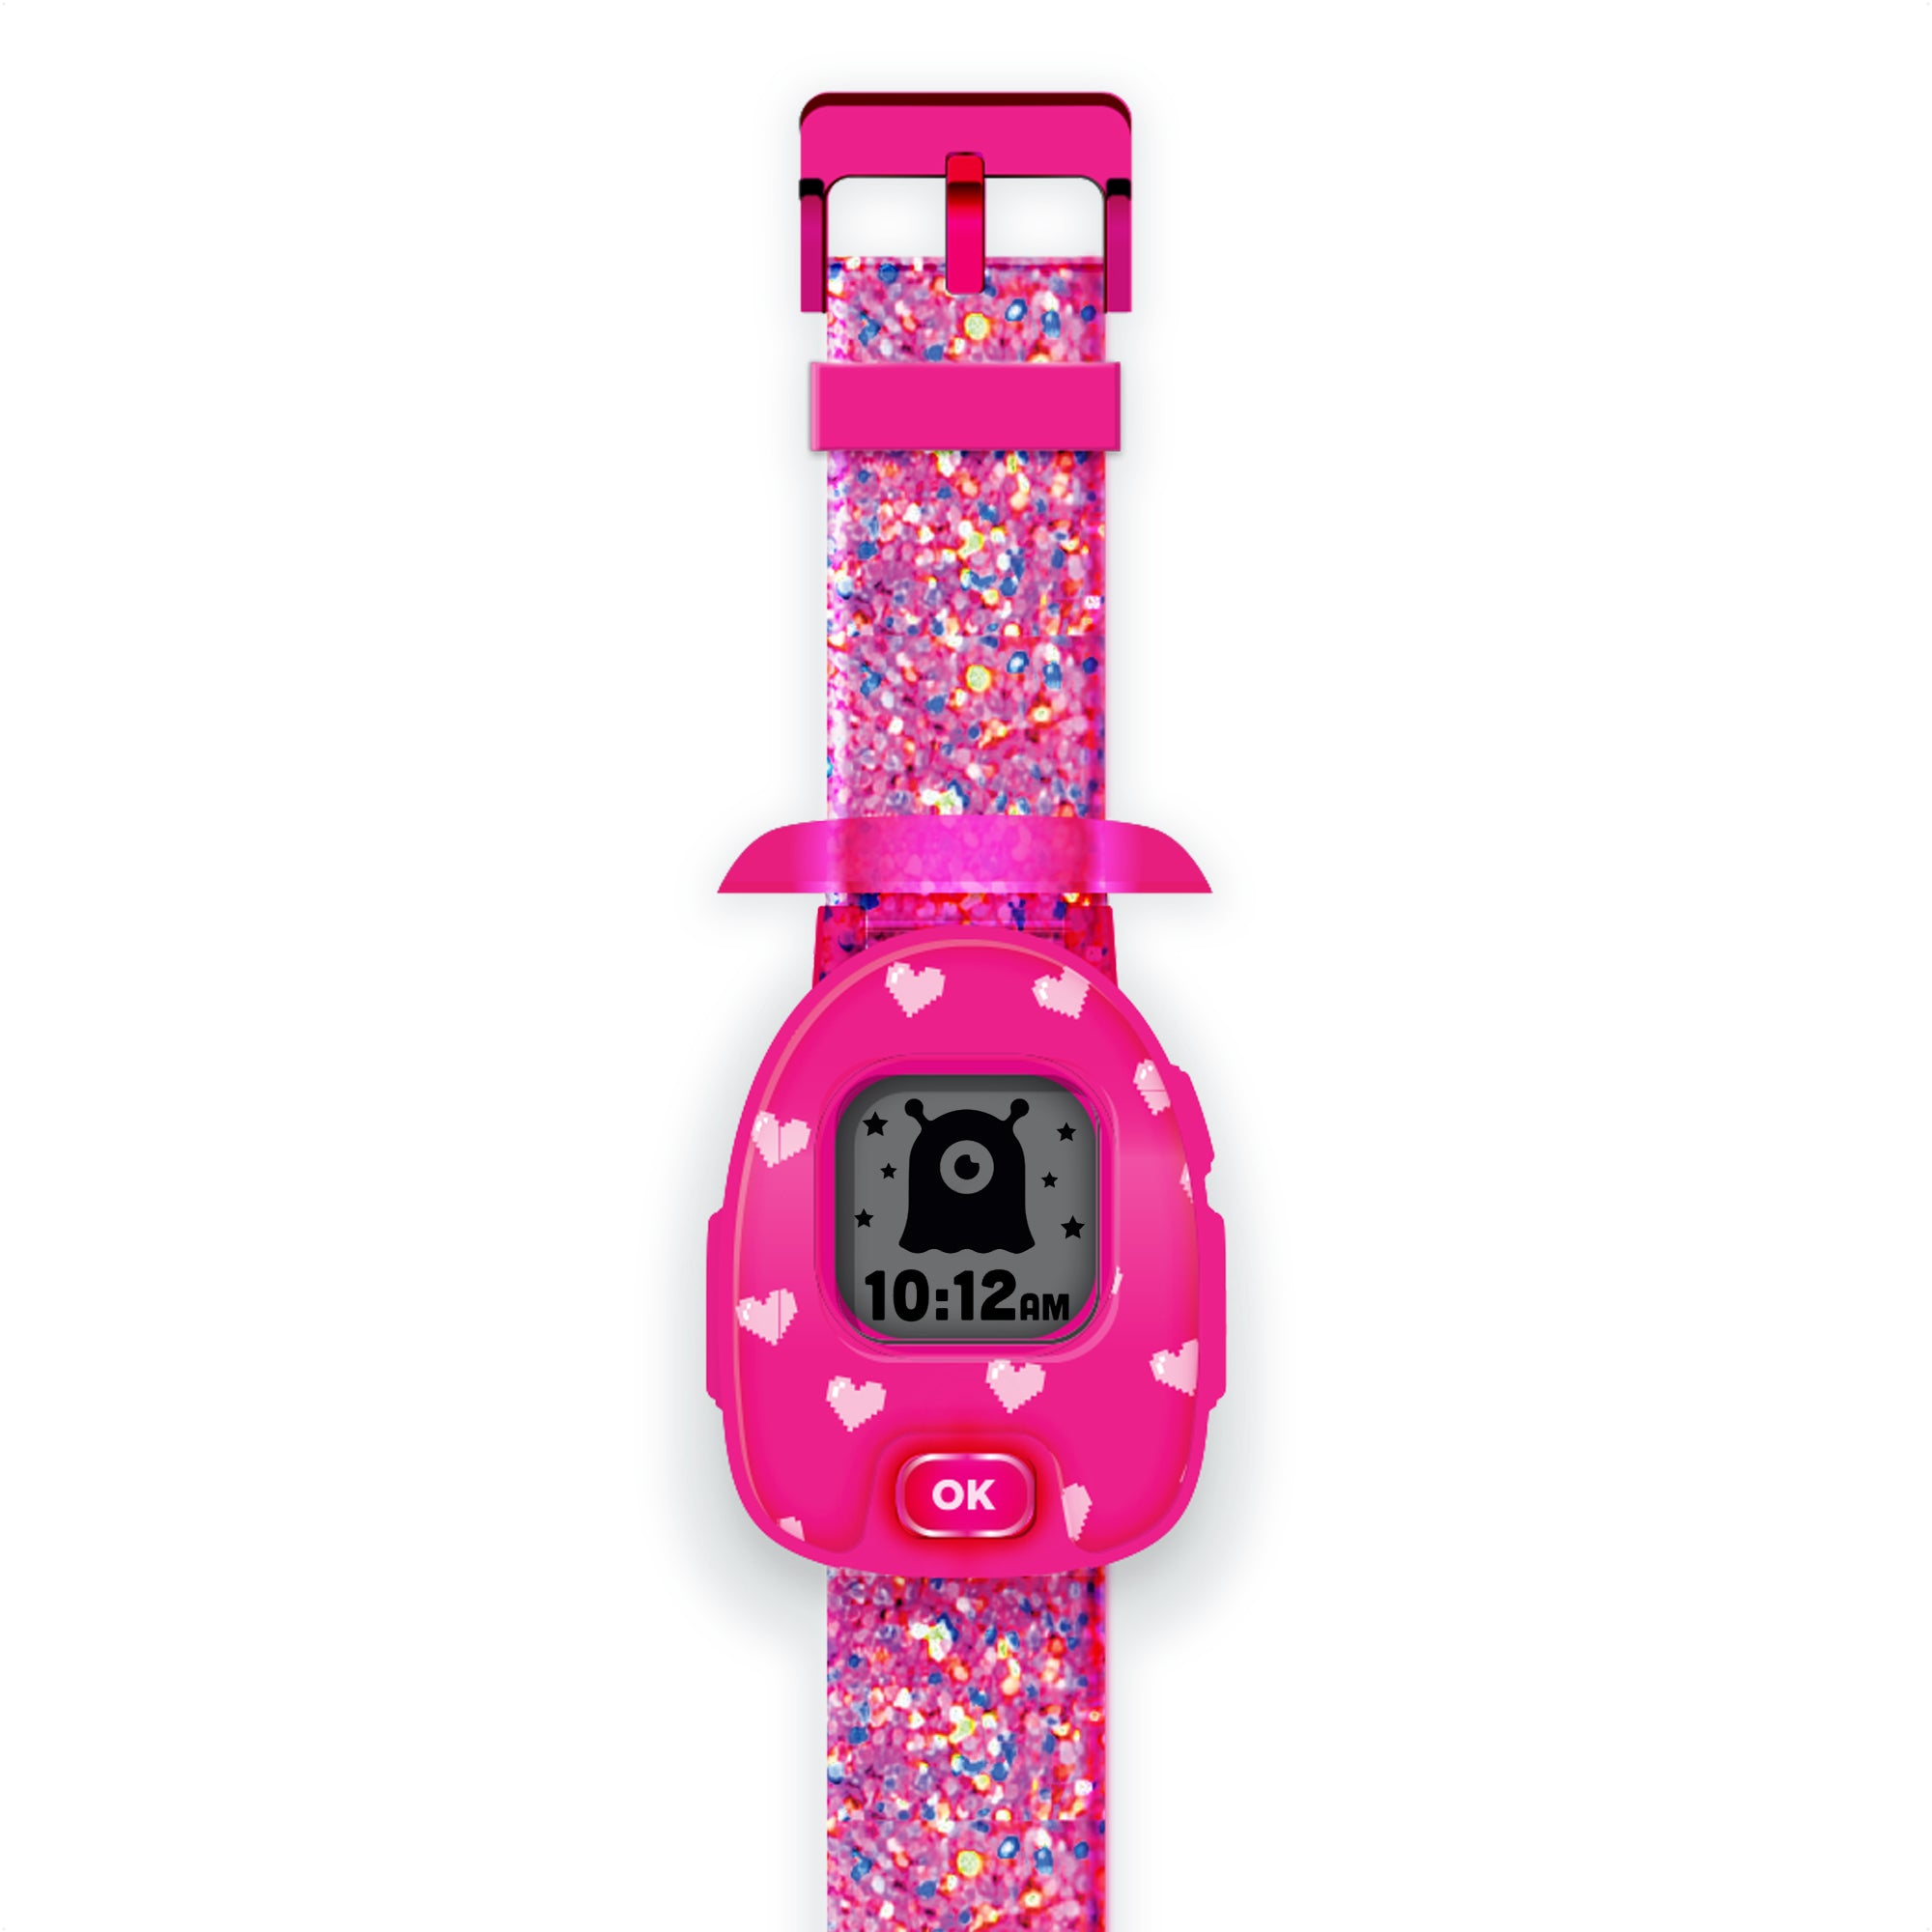 PlayZoom Hearts Smartwatch: Pink Hearts affordable smart watch